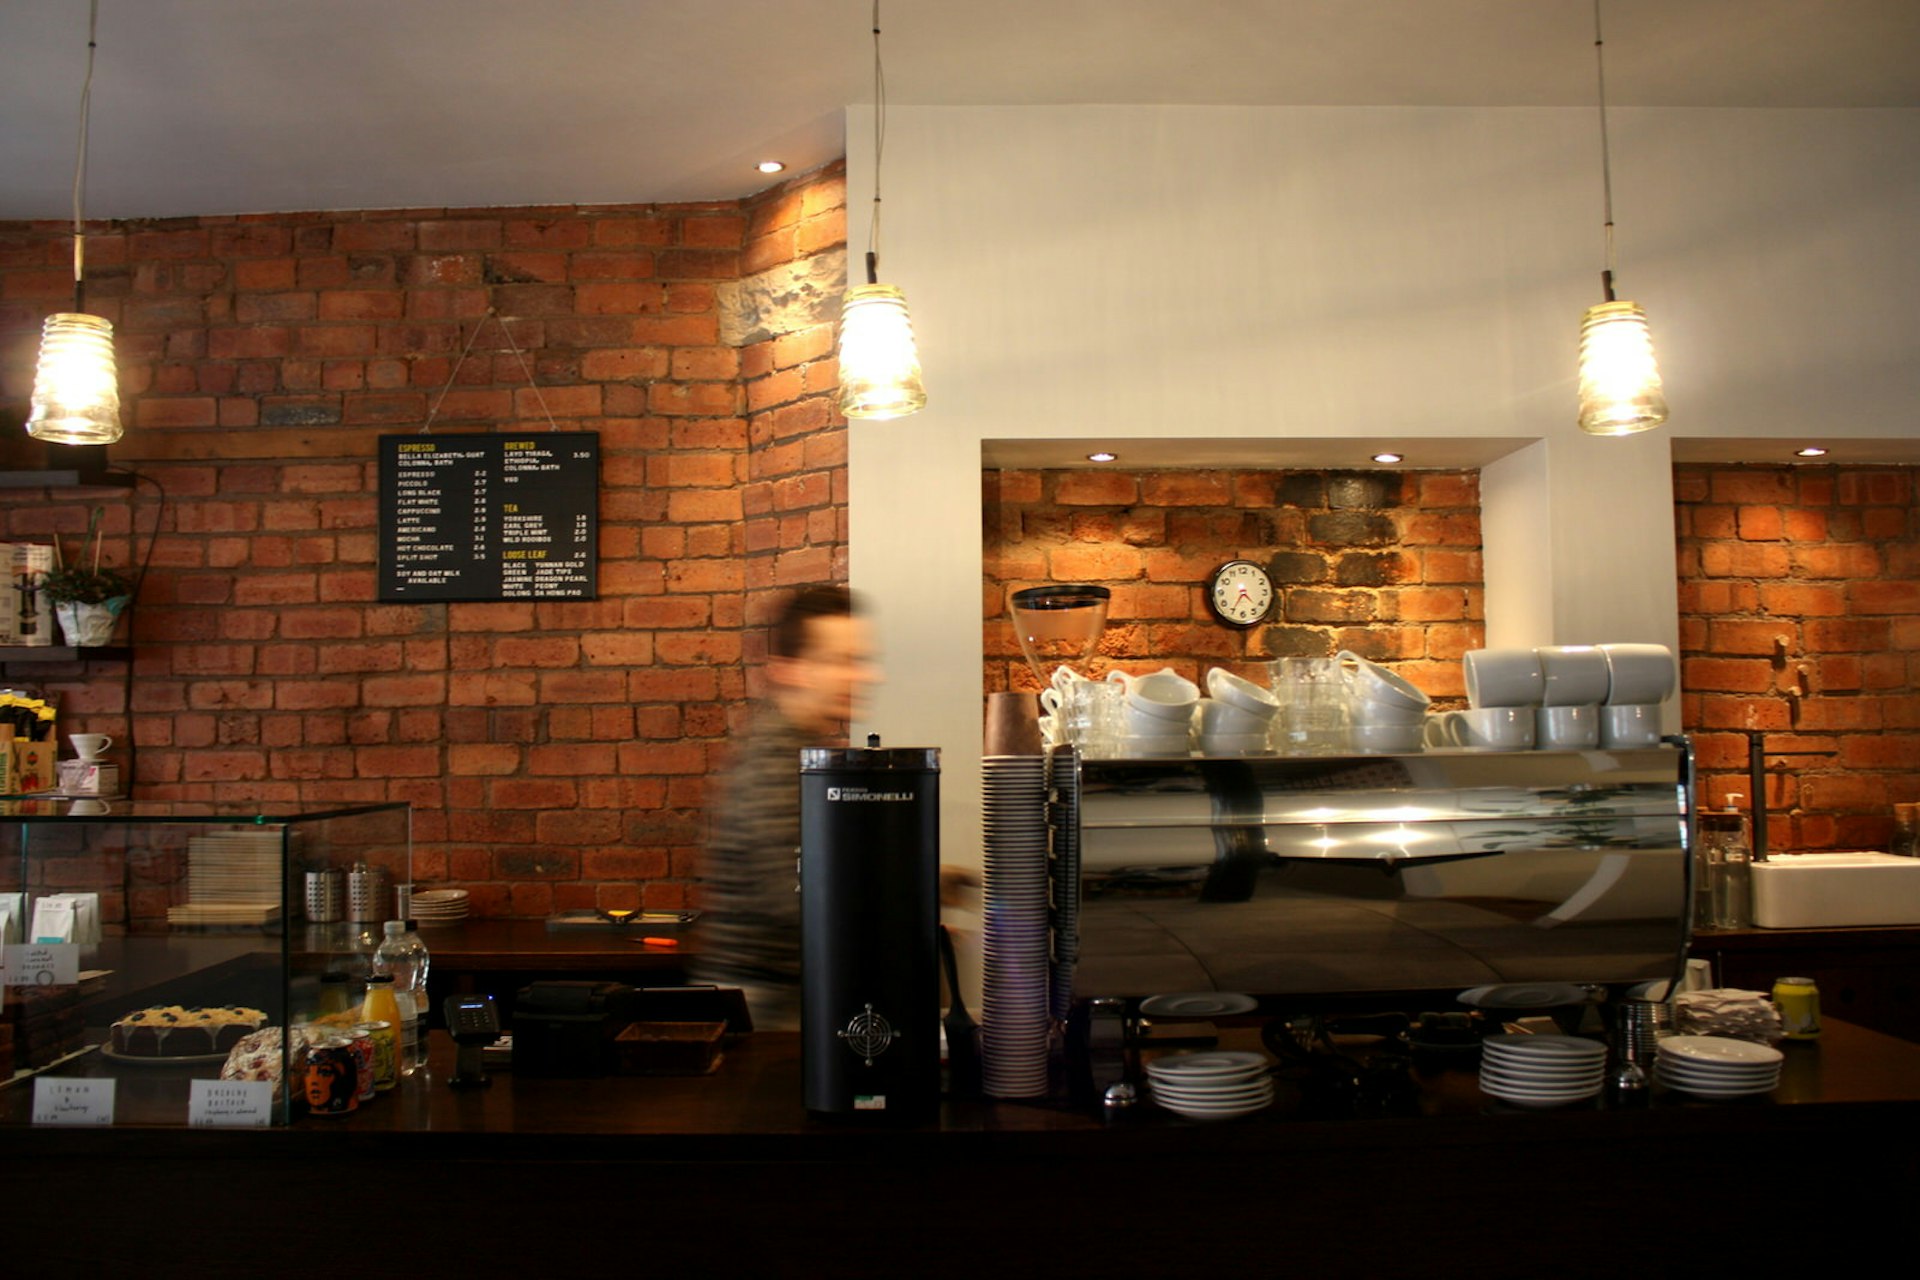 Laynes Espresso is one of the leading lights of Leeds' artisan coffee scene © Lorna Parkes / Lonely Planet